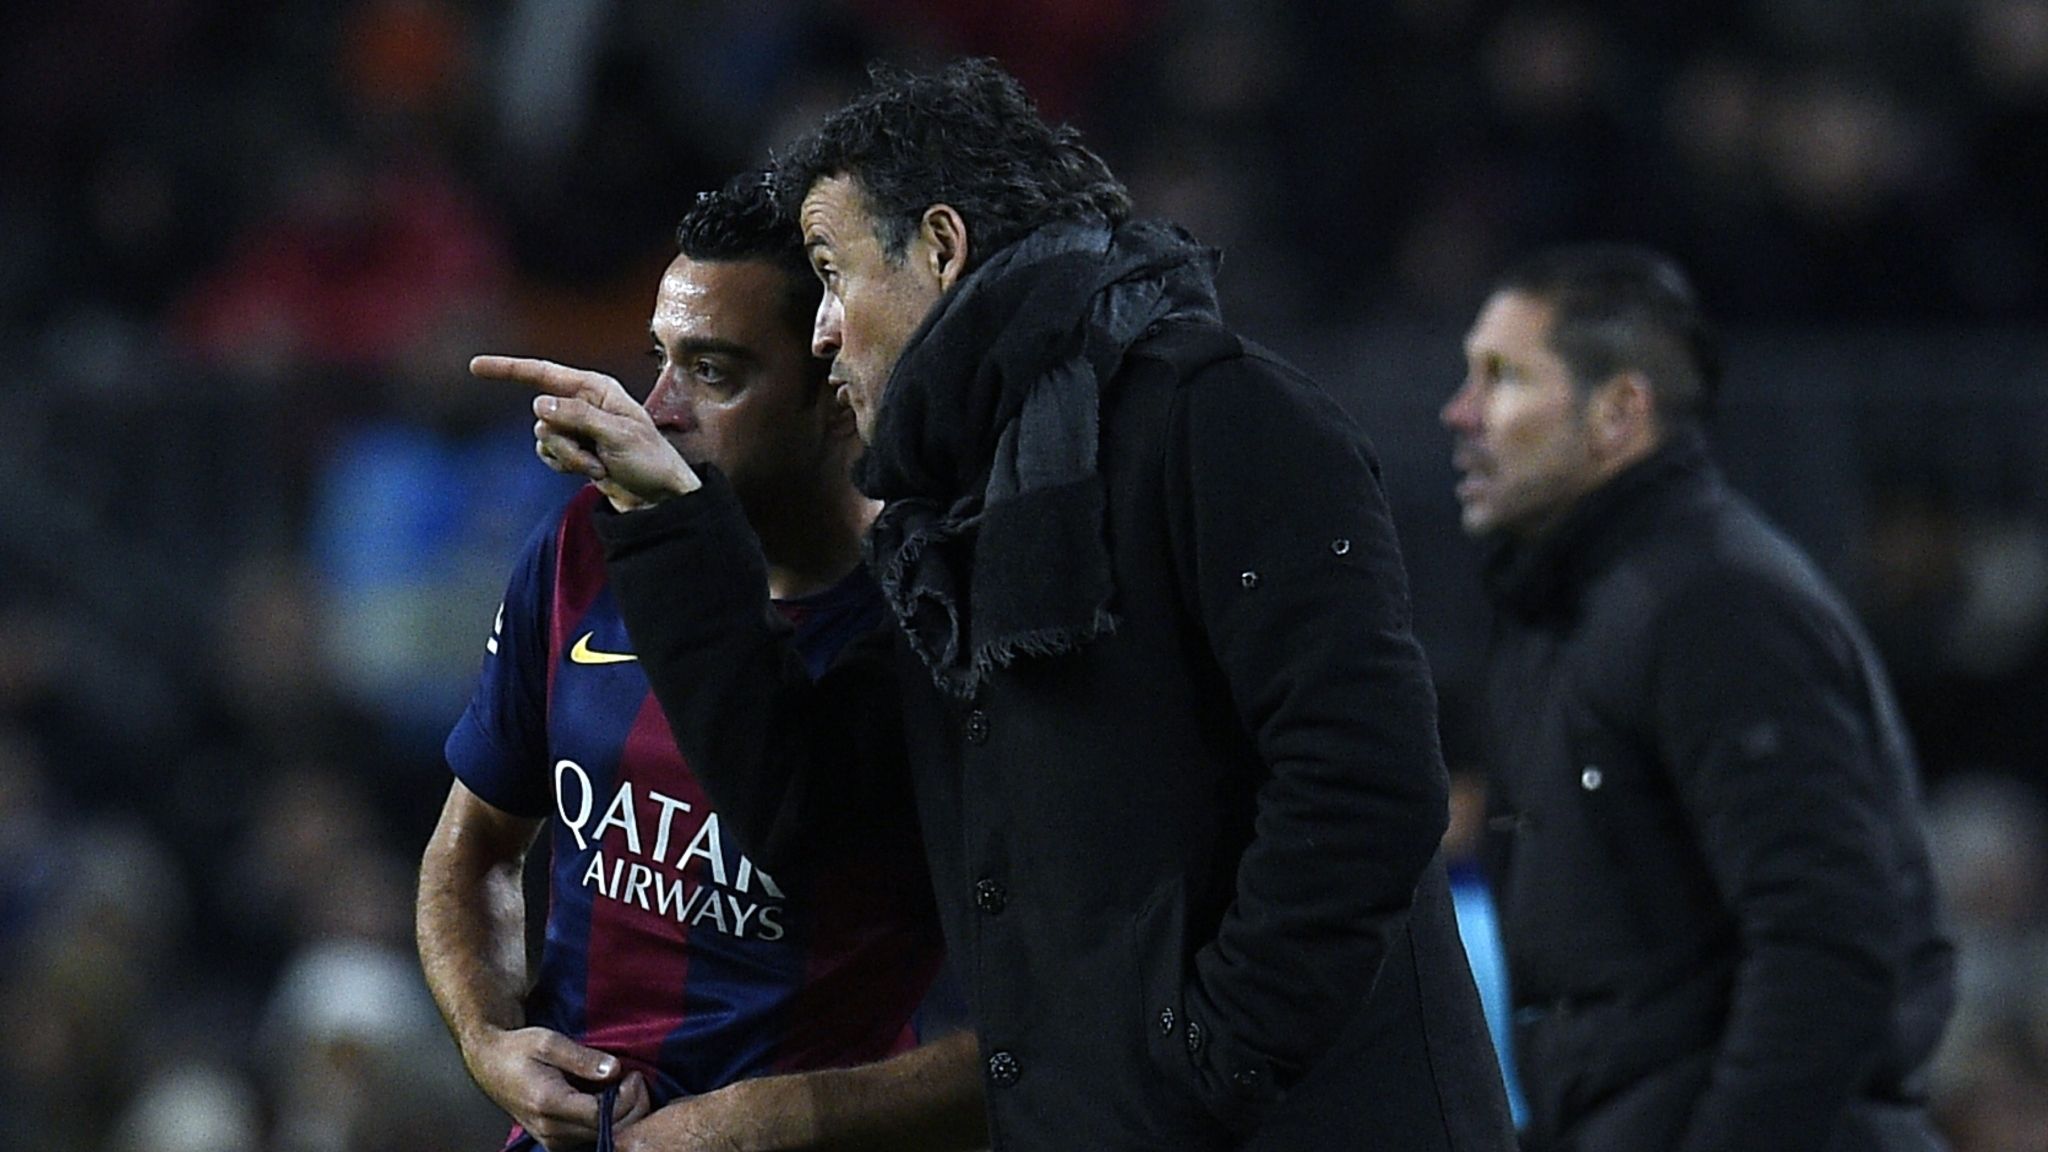 Luis Enrique's former assistant on Xavi's Barcelona: They didn't